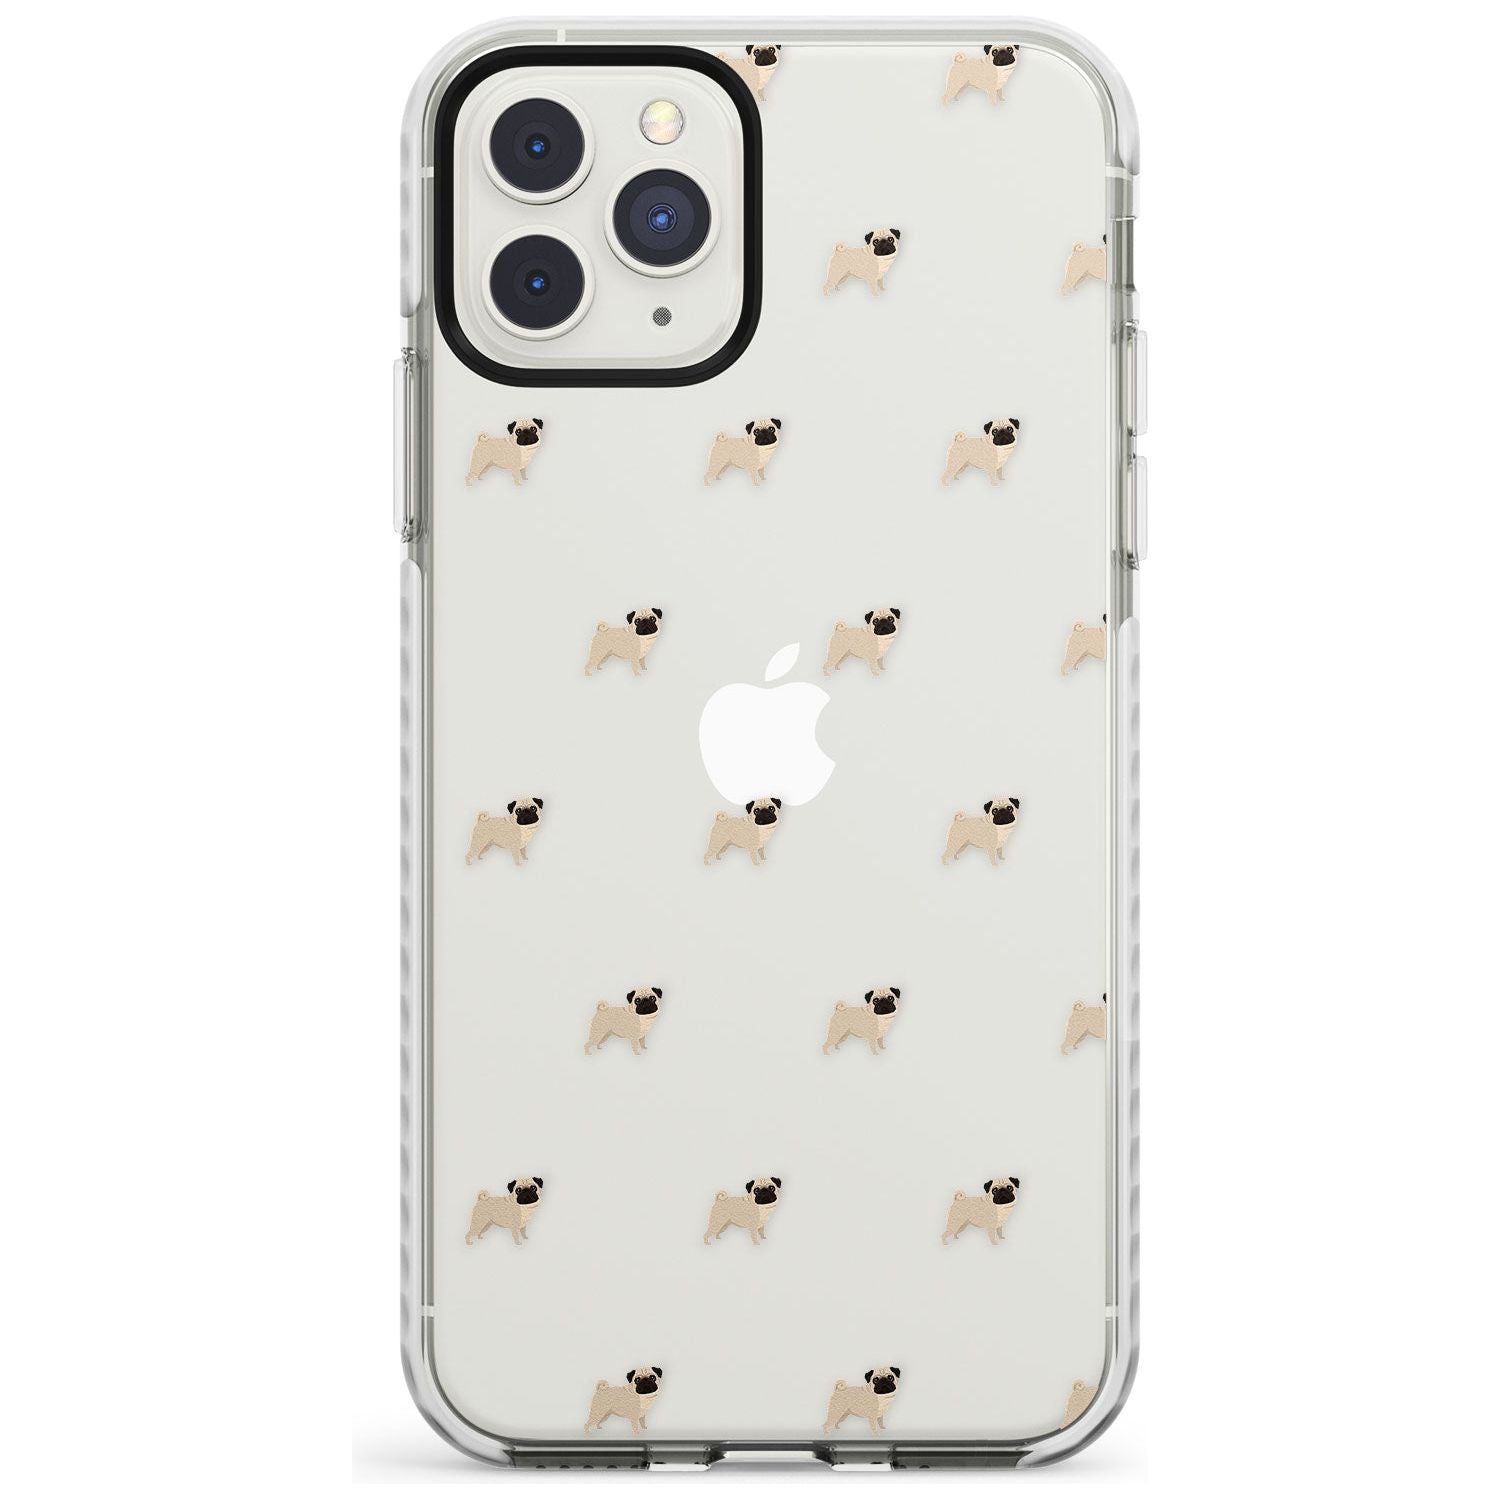 Pug Dog Pattern Clear Impact Phone Case for iPhone 11 Pro Max